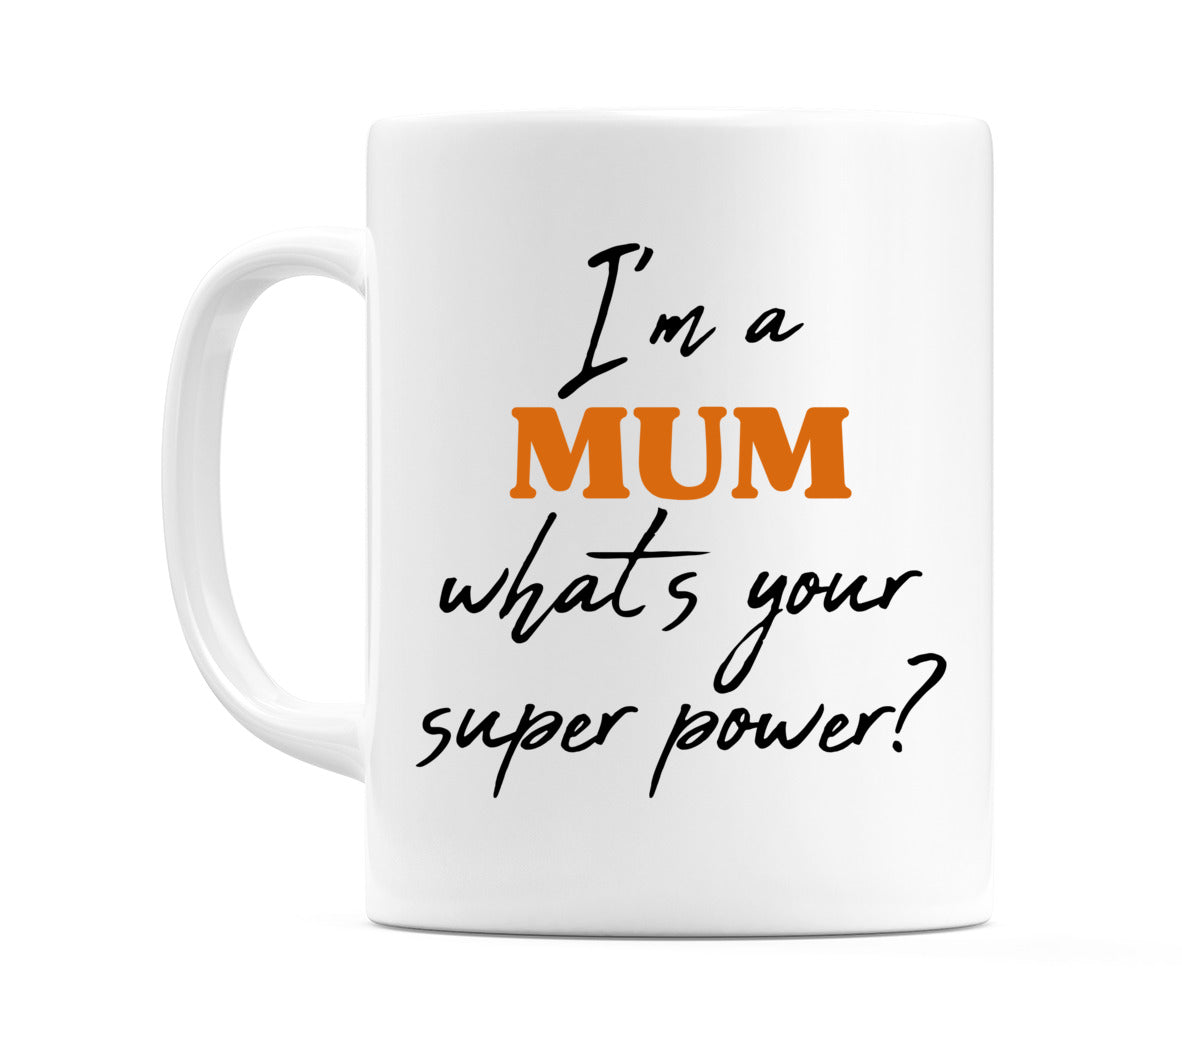 I'm a MUM what's your super power?